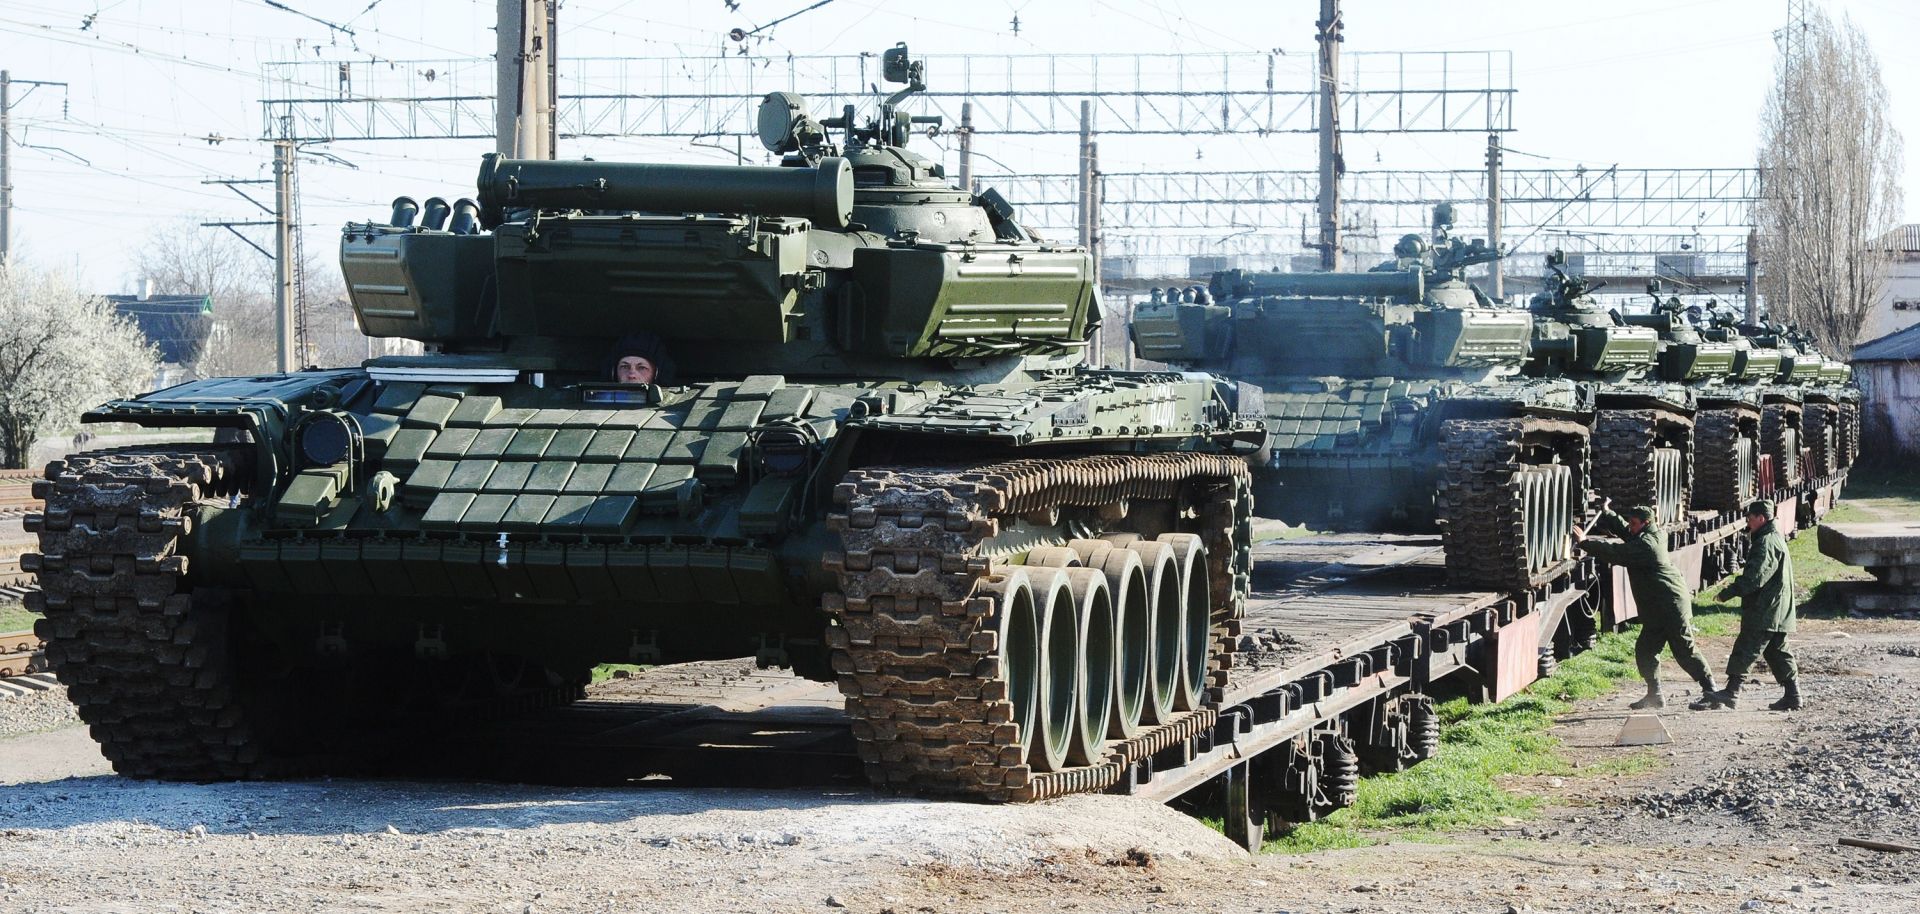 Russian soldiers unload modified T-72 tanks at the Gvardeyskoe railway station near the Crimean capital of Simferopol on March 31, 2014.